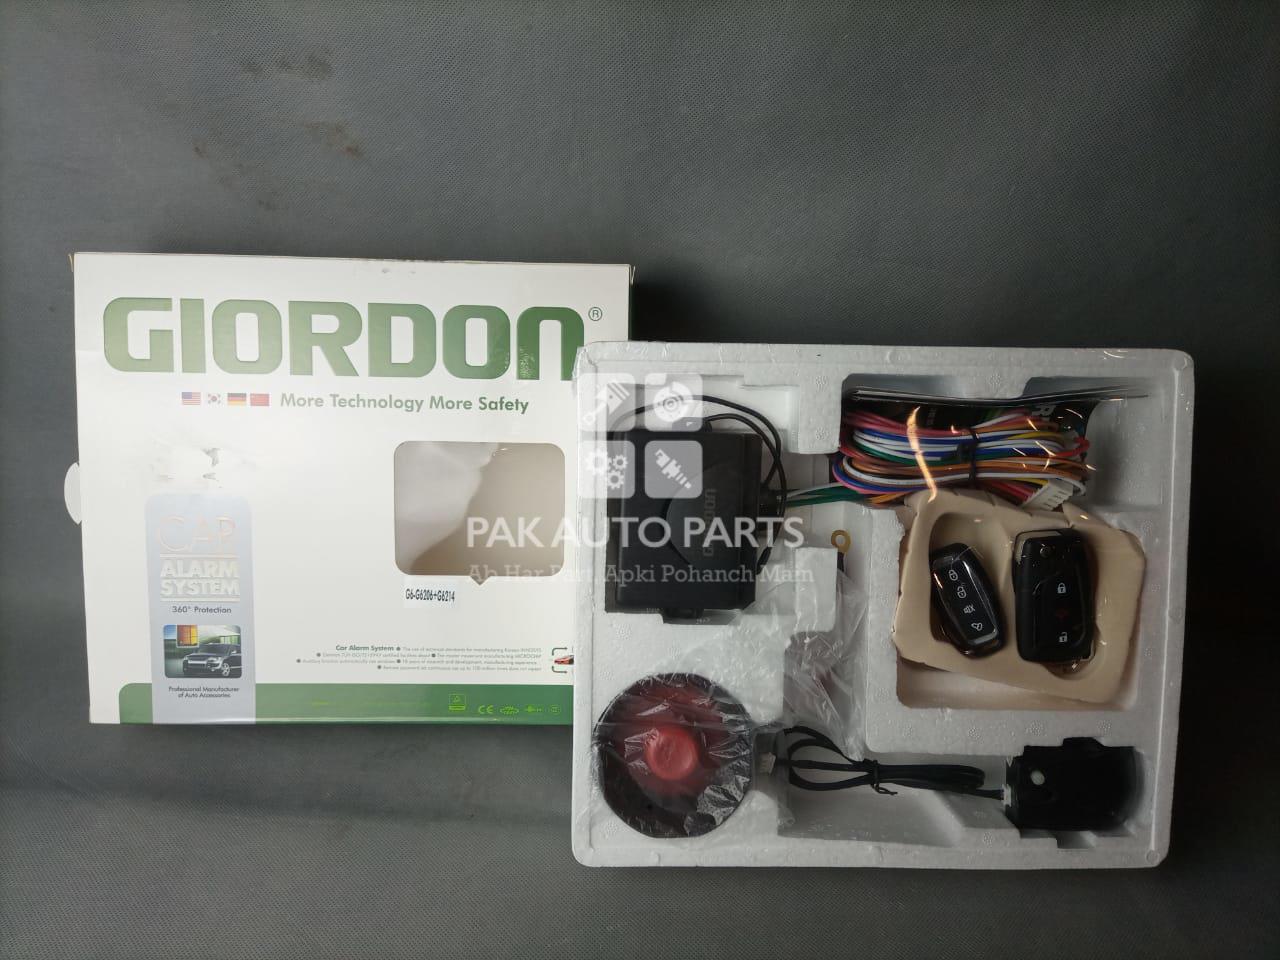 Picture of GIORDON Car Universal Alarm System